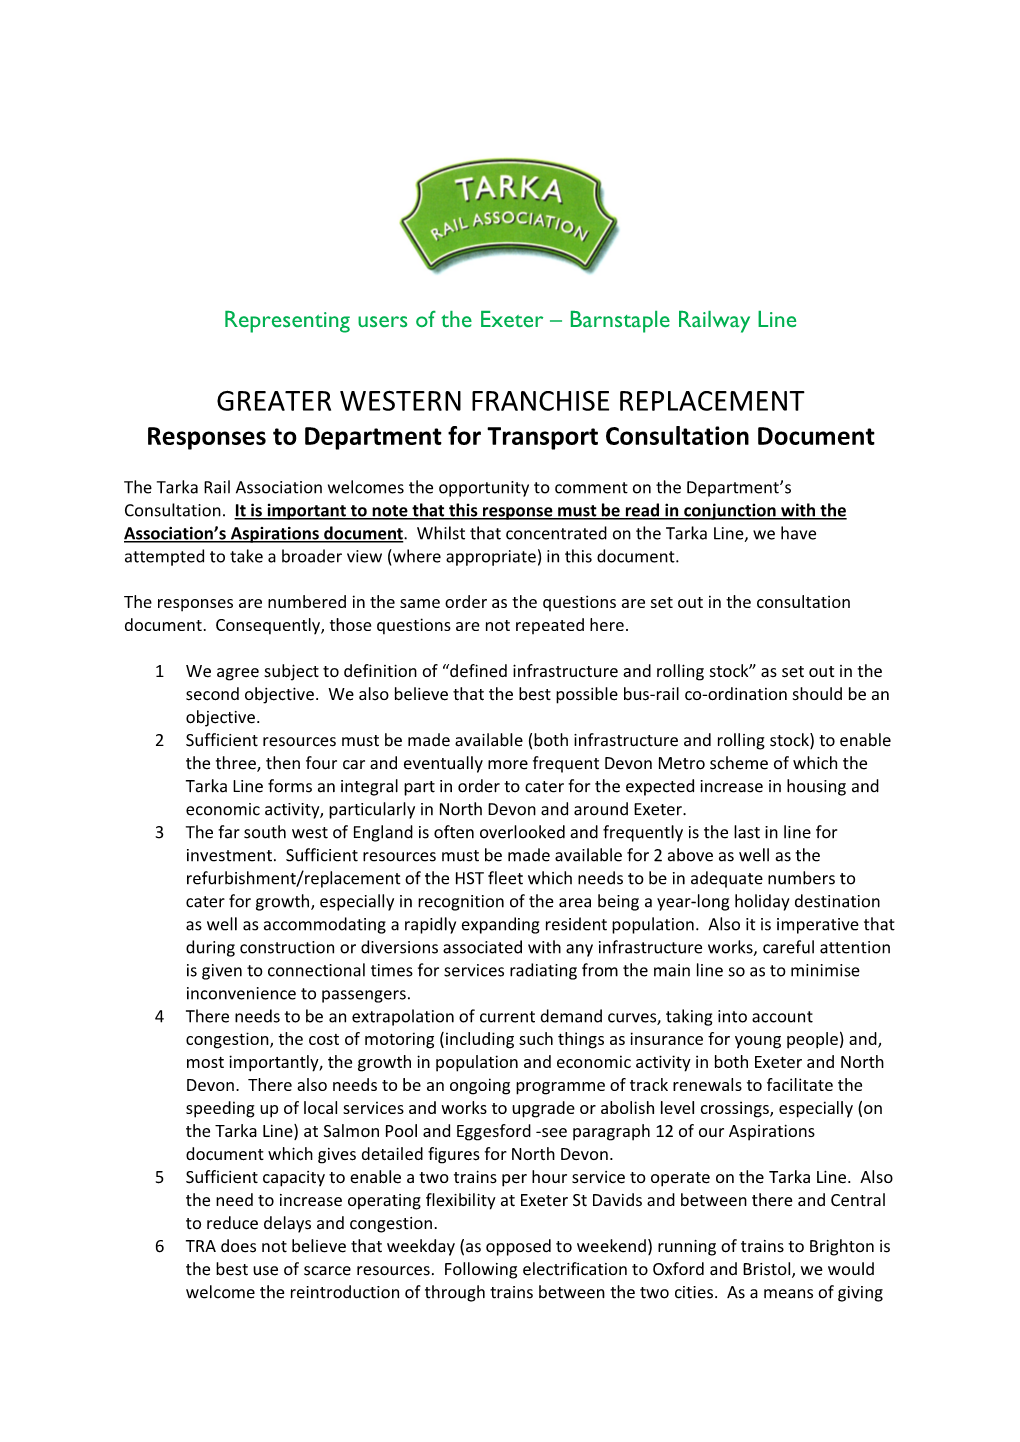 GREATER WESTERN FRANCHISE REPLACEMENT Responses to Department for Transport Consultation Document